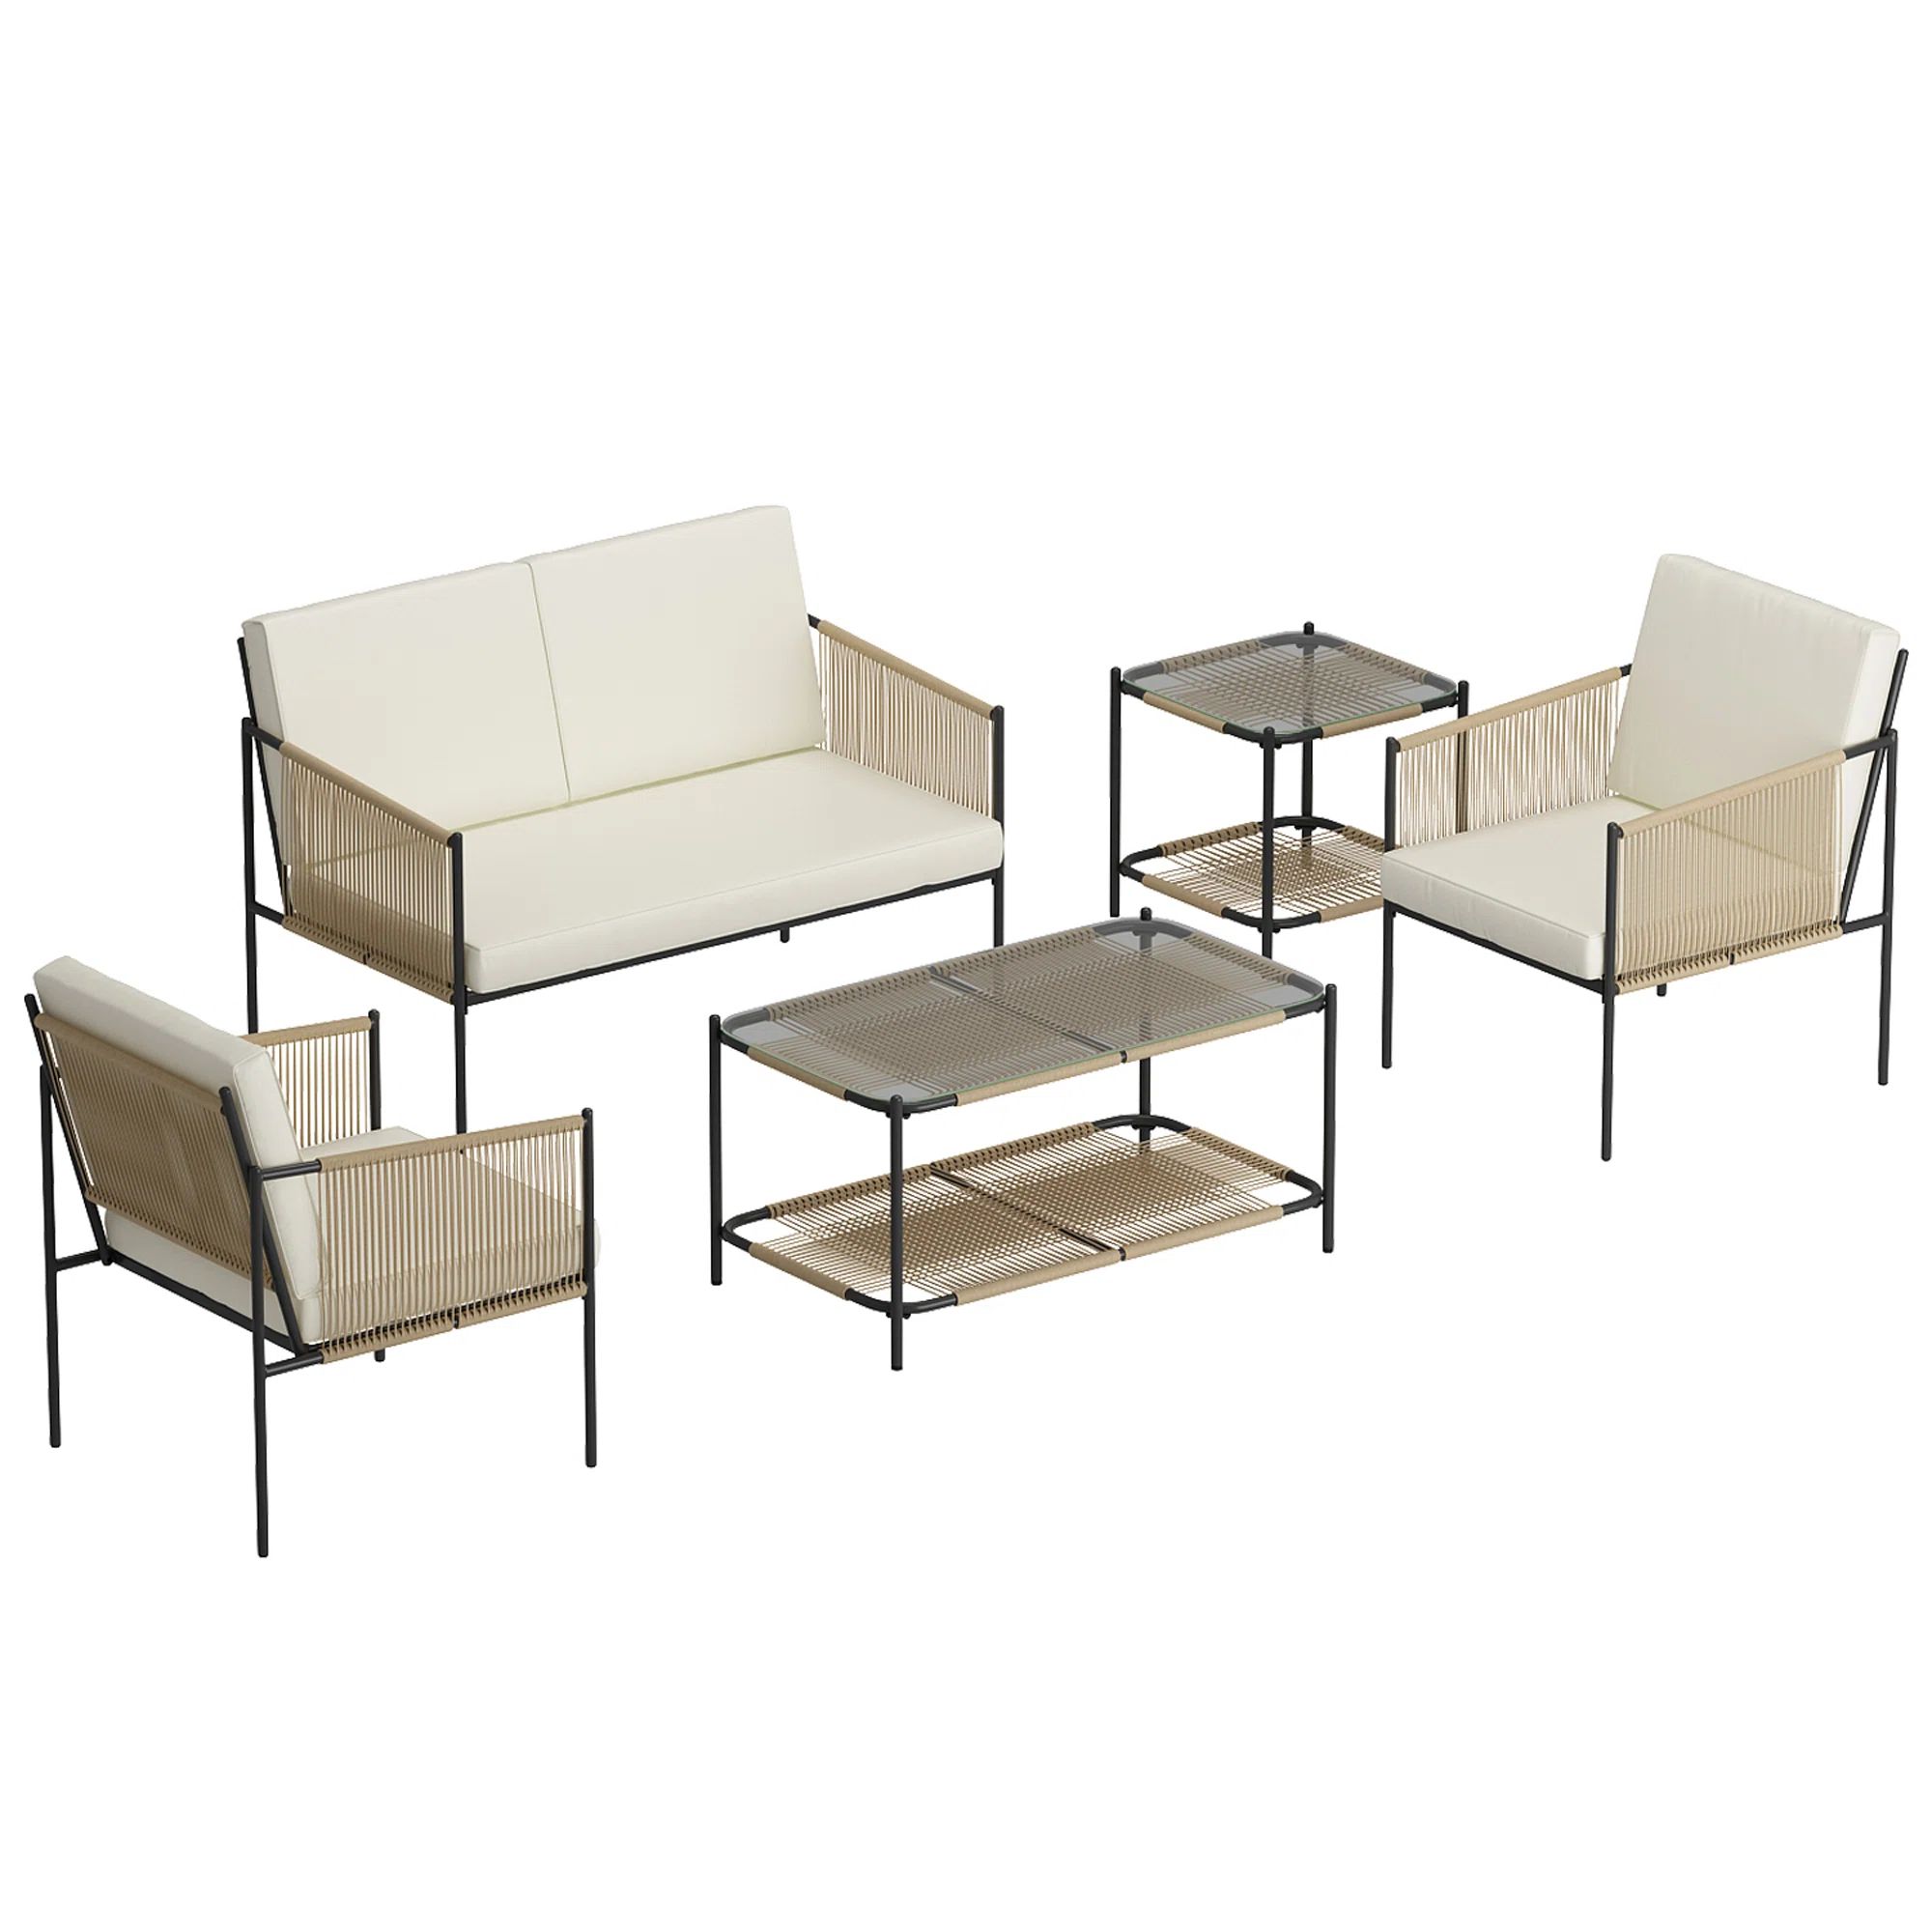 Camesha 4 - Person Outdoor Seating Group with Cushions | Wayfair North America